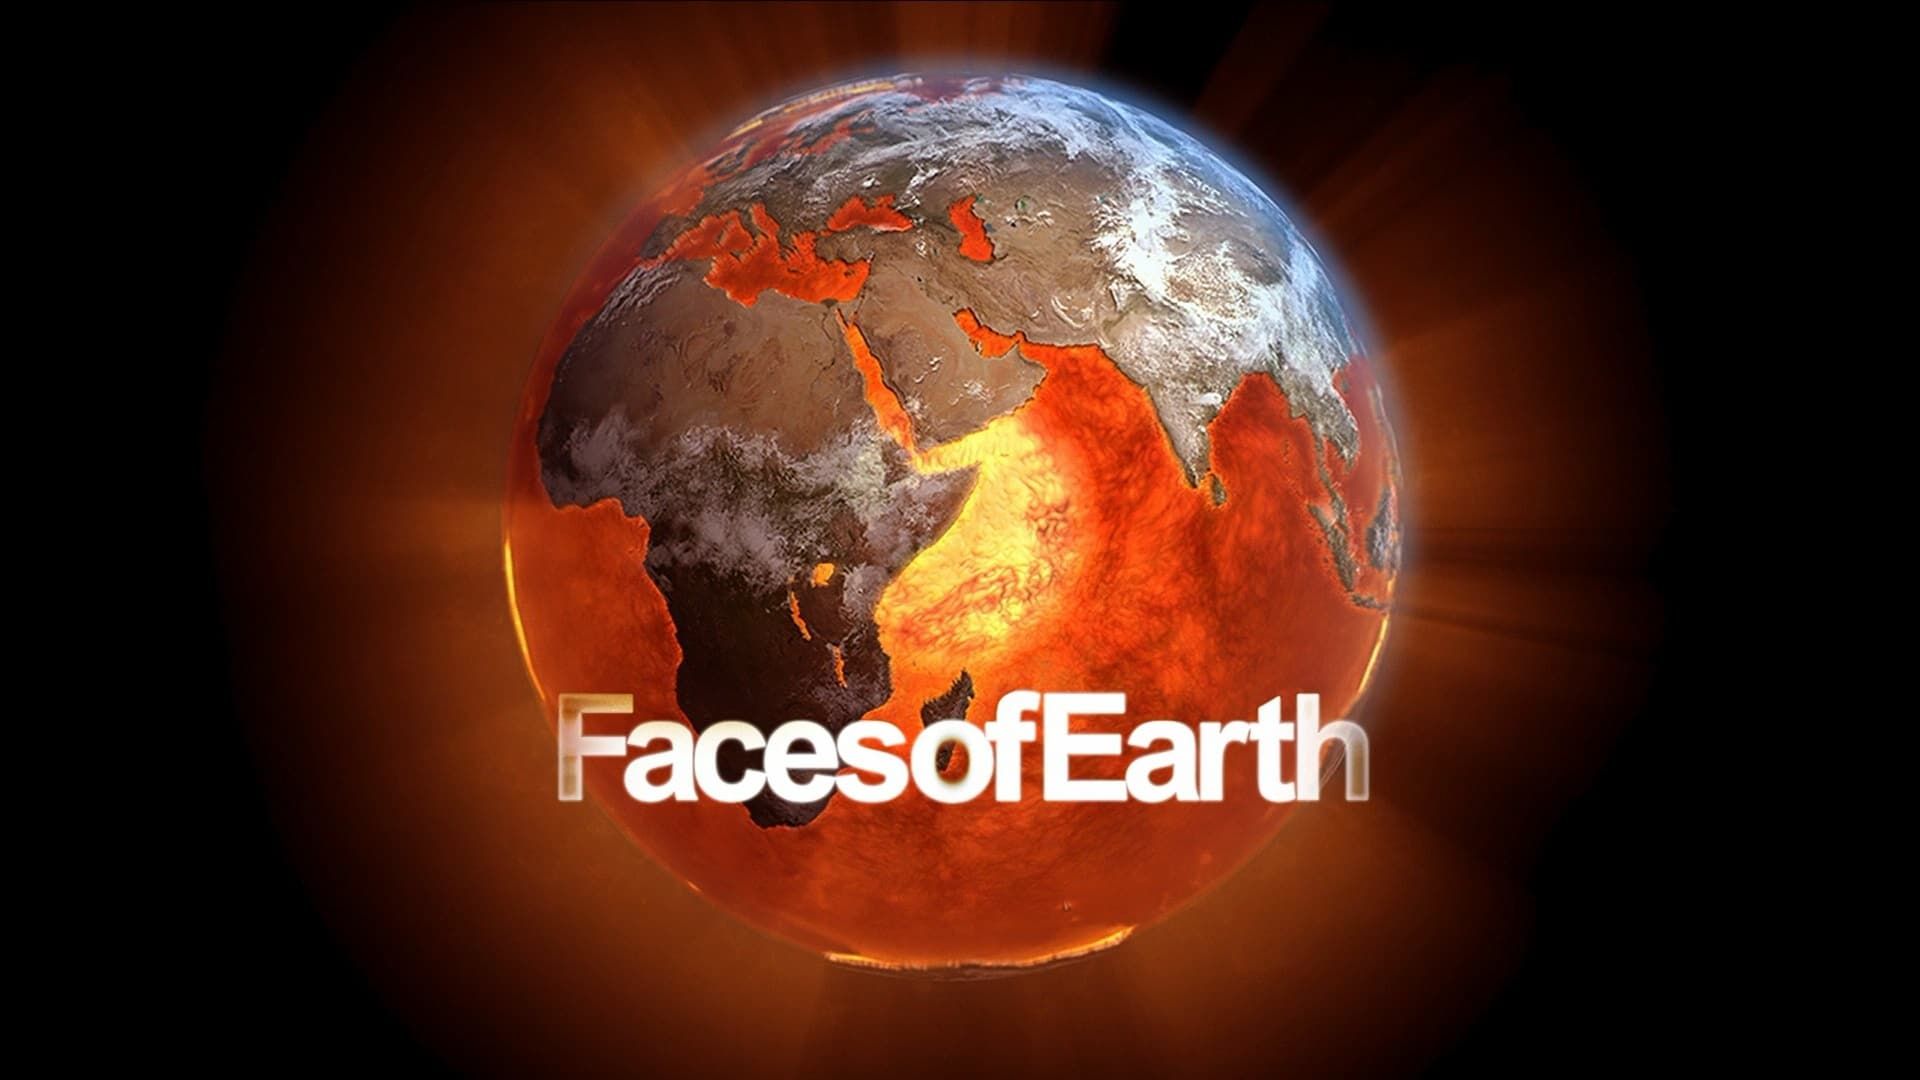 Faces of Earth background